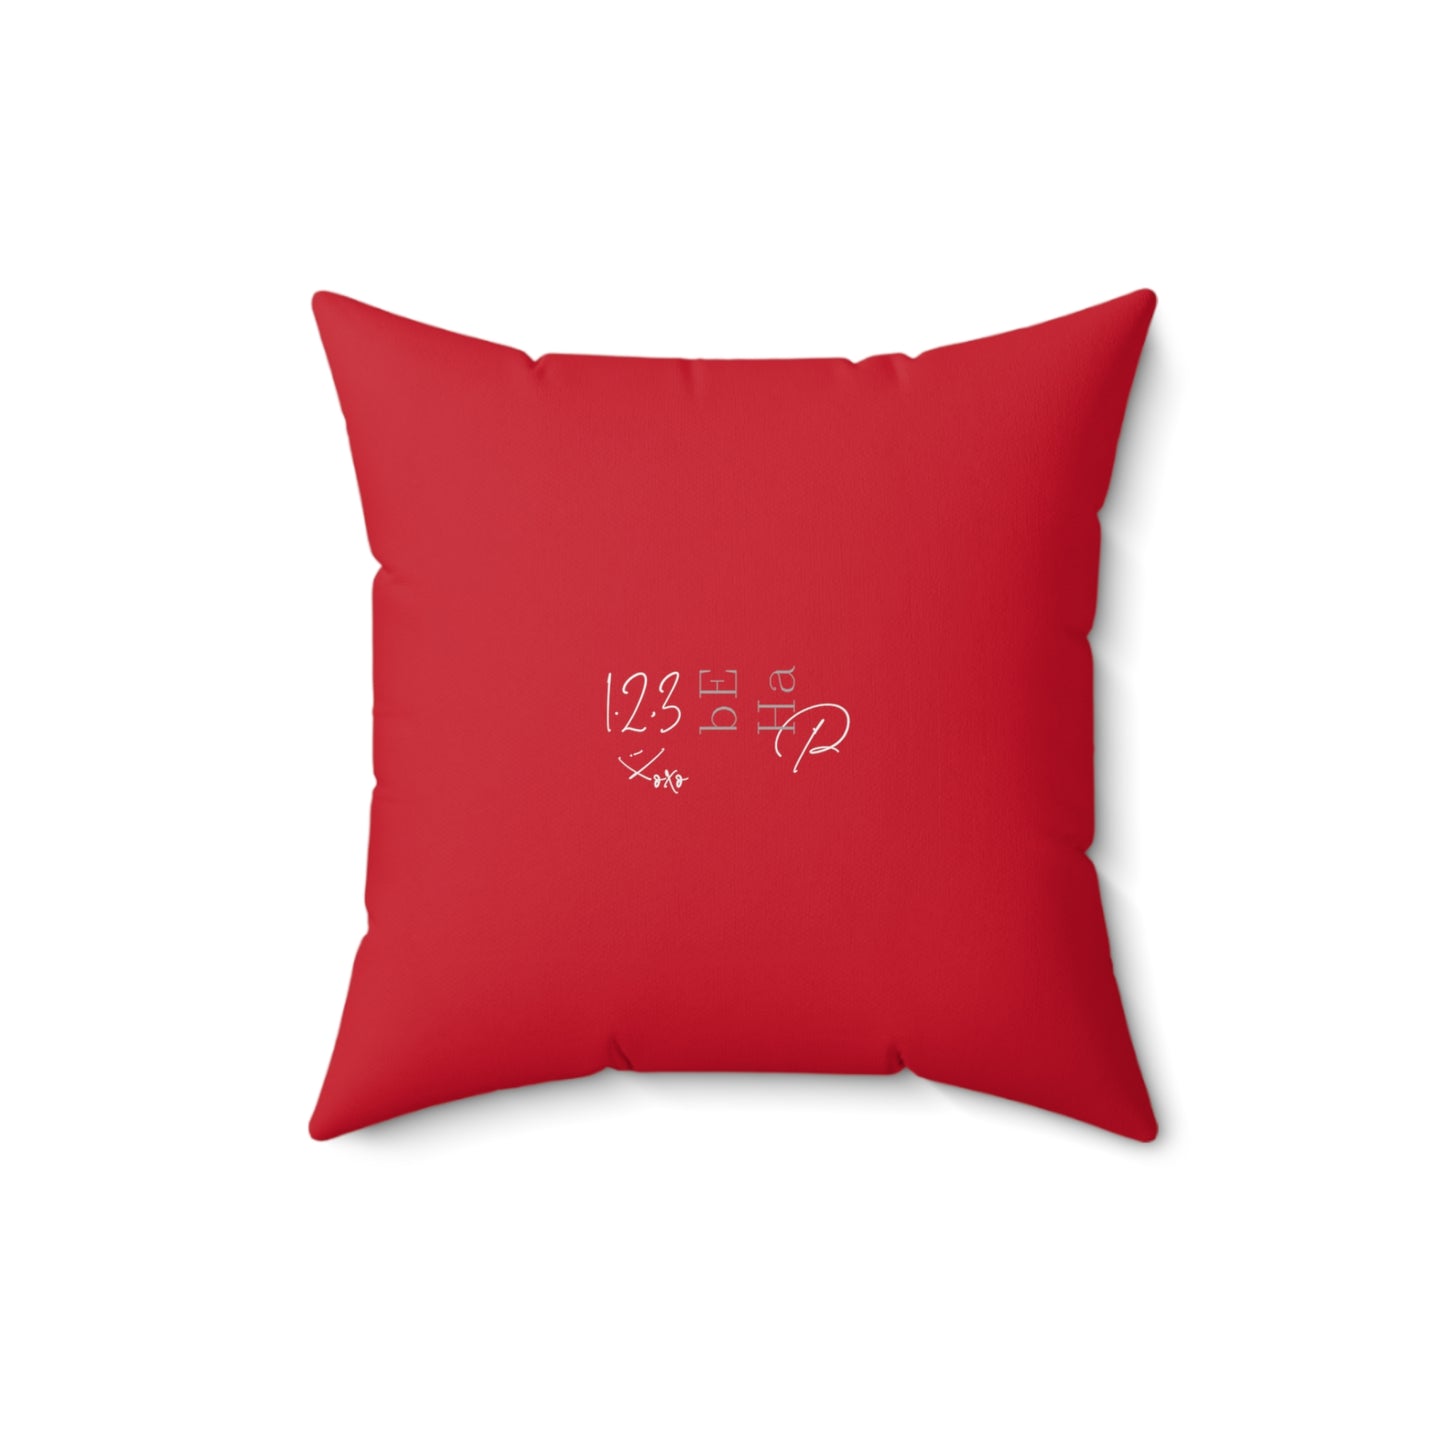 Faux Suede Square Pillow - BeHaP Red Sunset